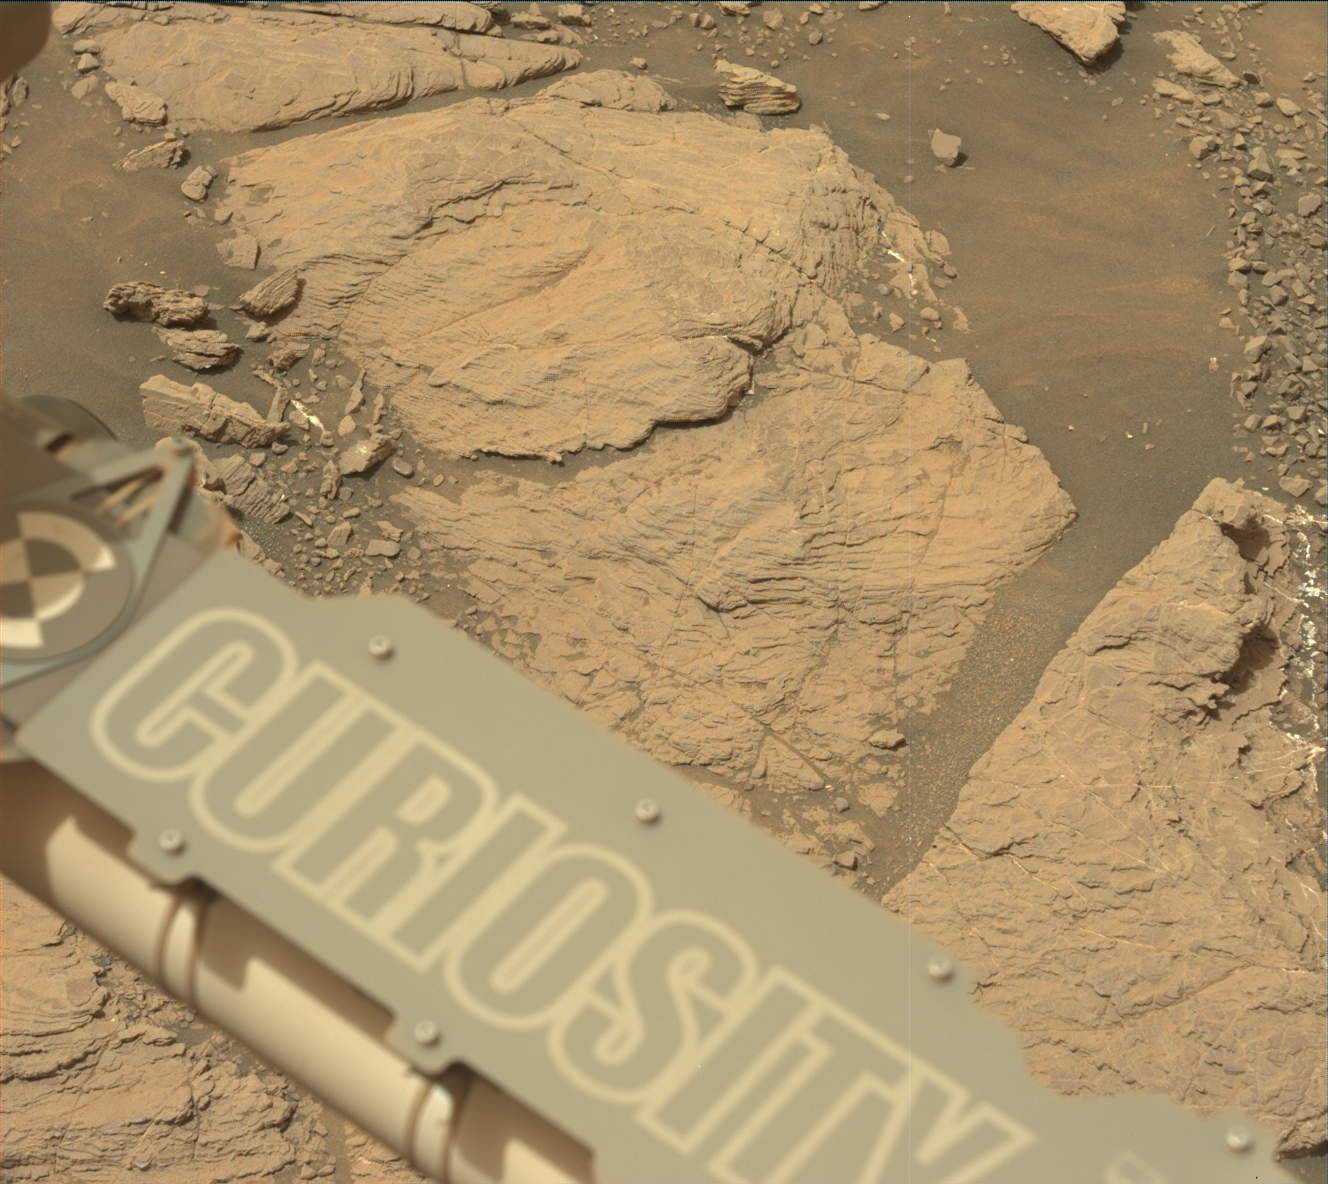 NASA's Curiosity Mars took this image with its Mastcam on Feb. 10, 2019 (Sol 2316). The rover is currently exploring a region of Mount Sharp nicknamed "Glen Torridon" that has lots of clay minerals.